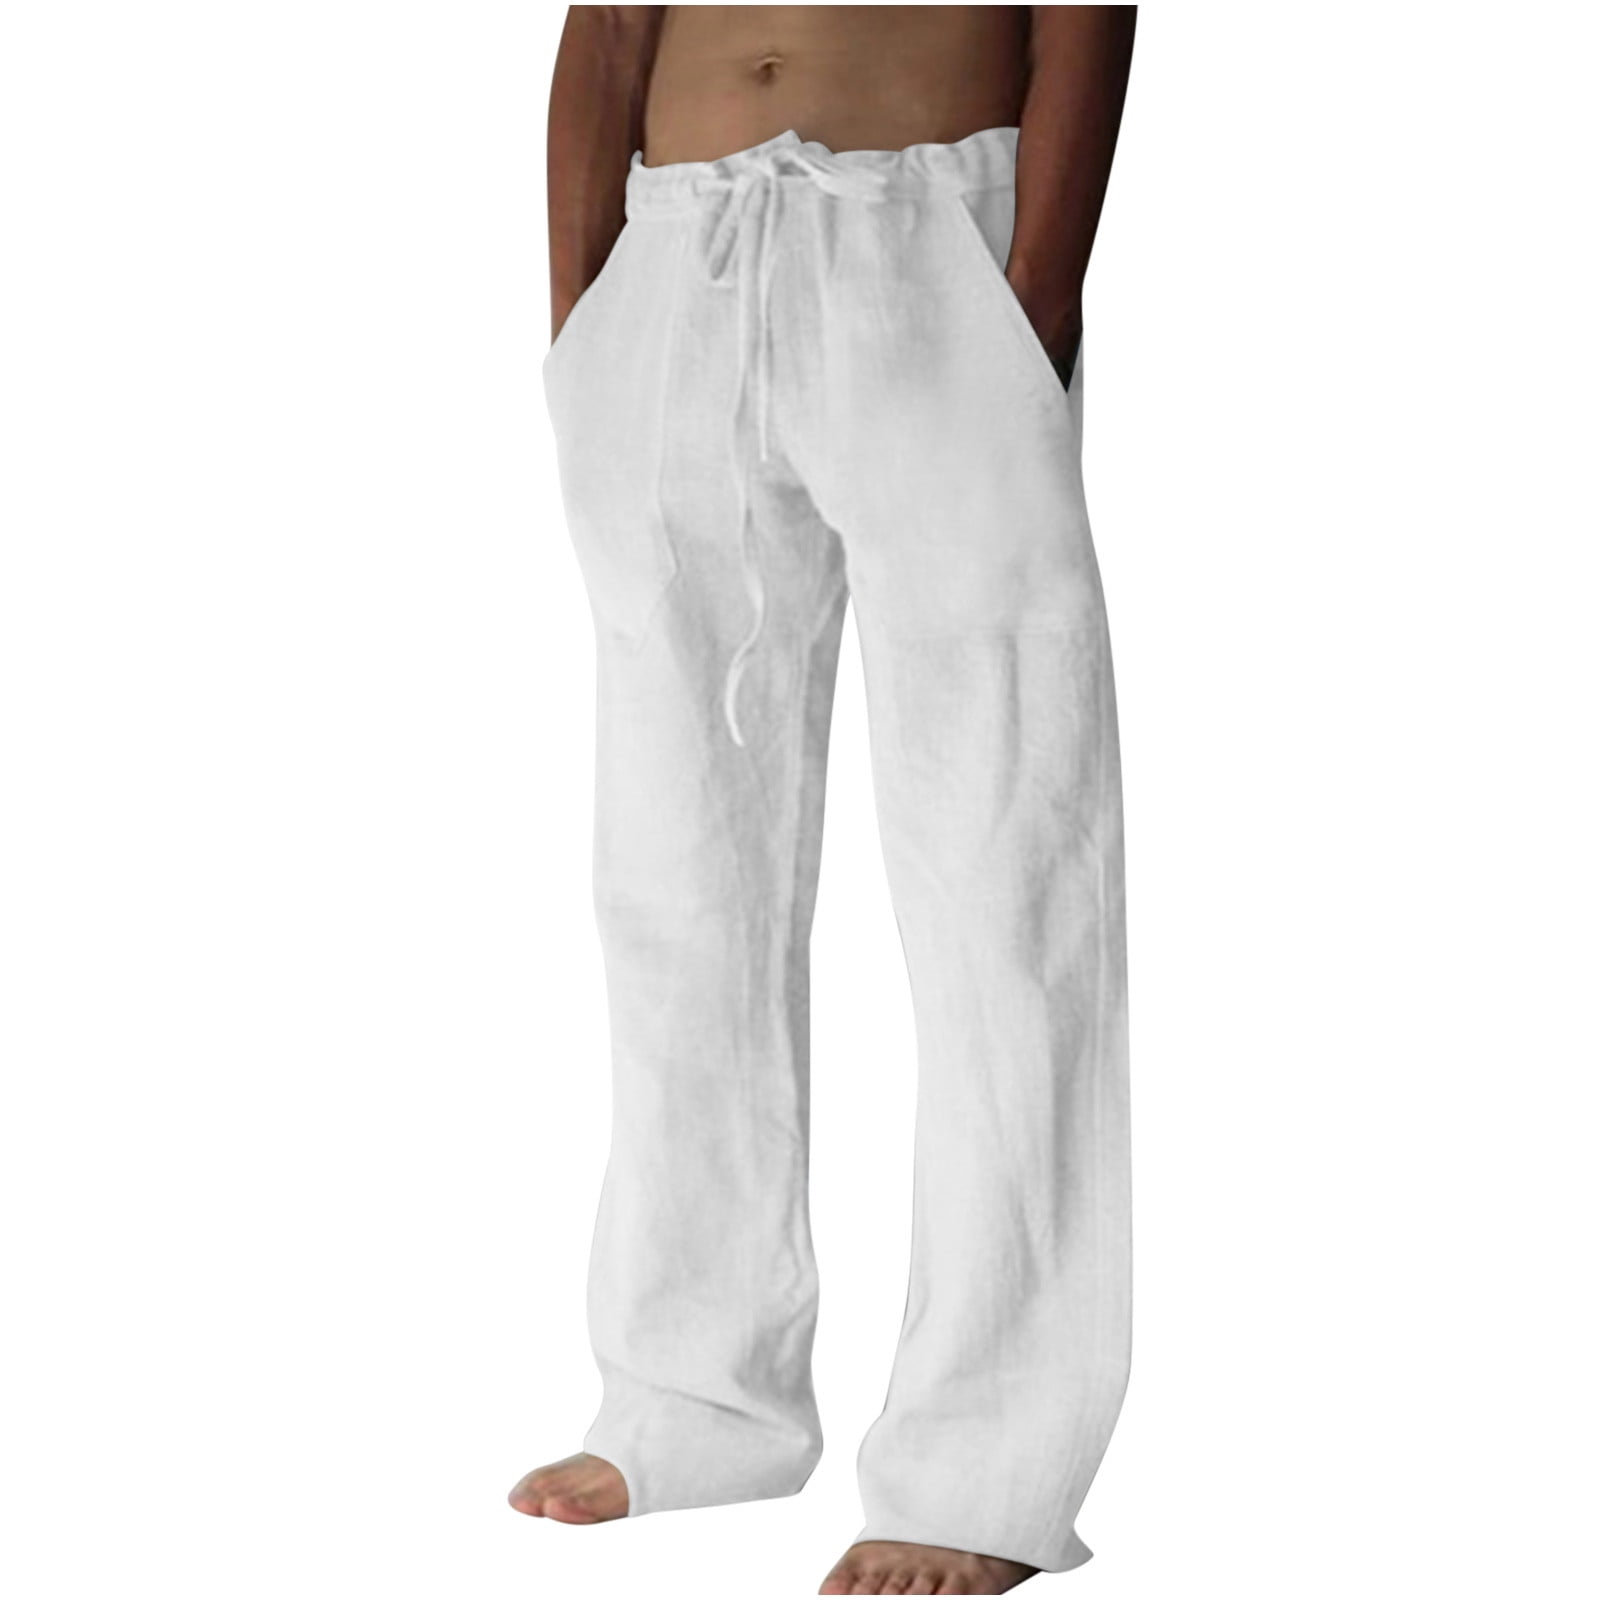 The Royal Getup White Cotton Aligarhi Men's Lower with Dori - Royal Getup